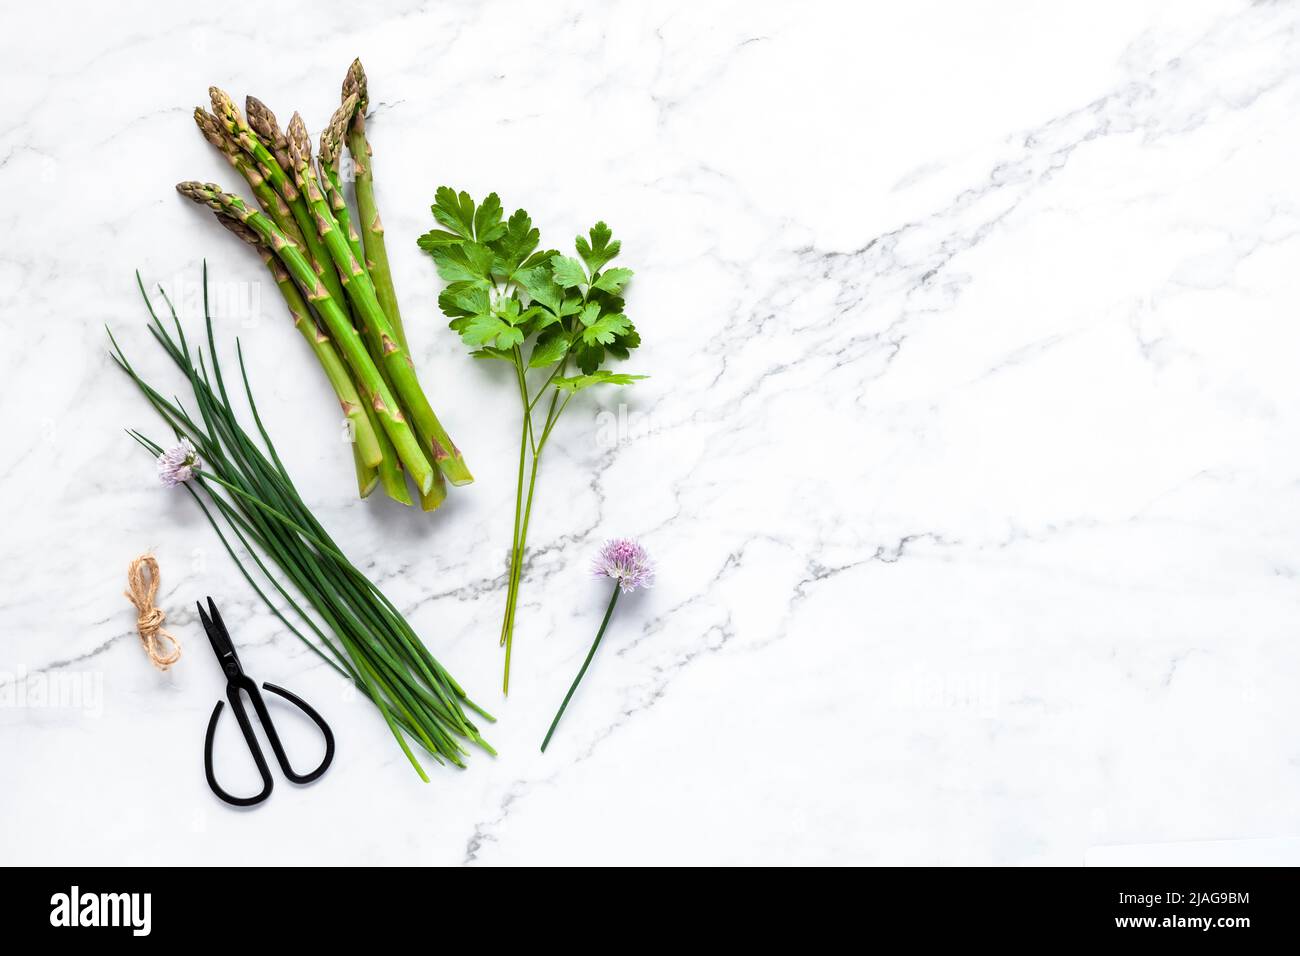 Asparagus, chive and parsley of the home garden Stock Photo